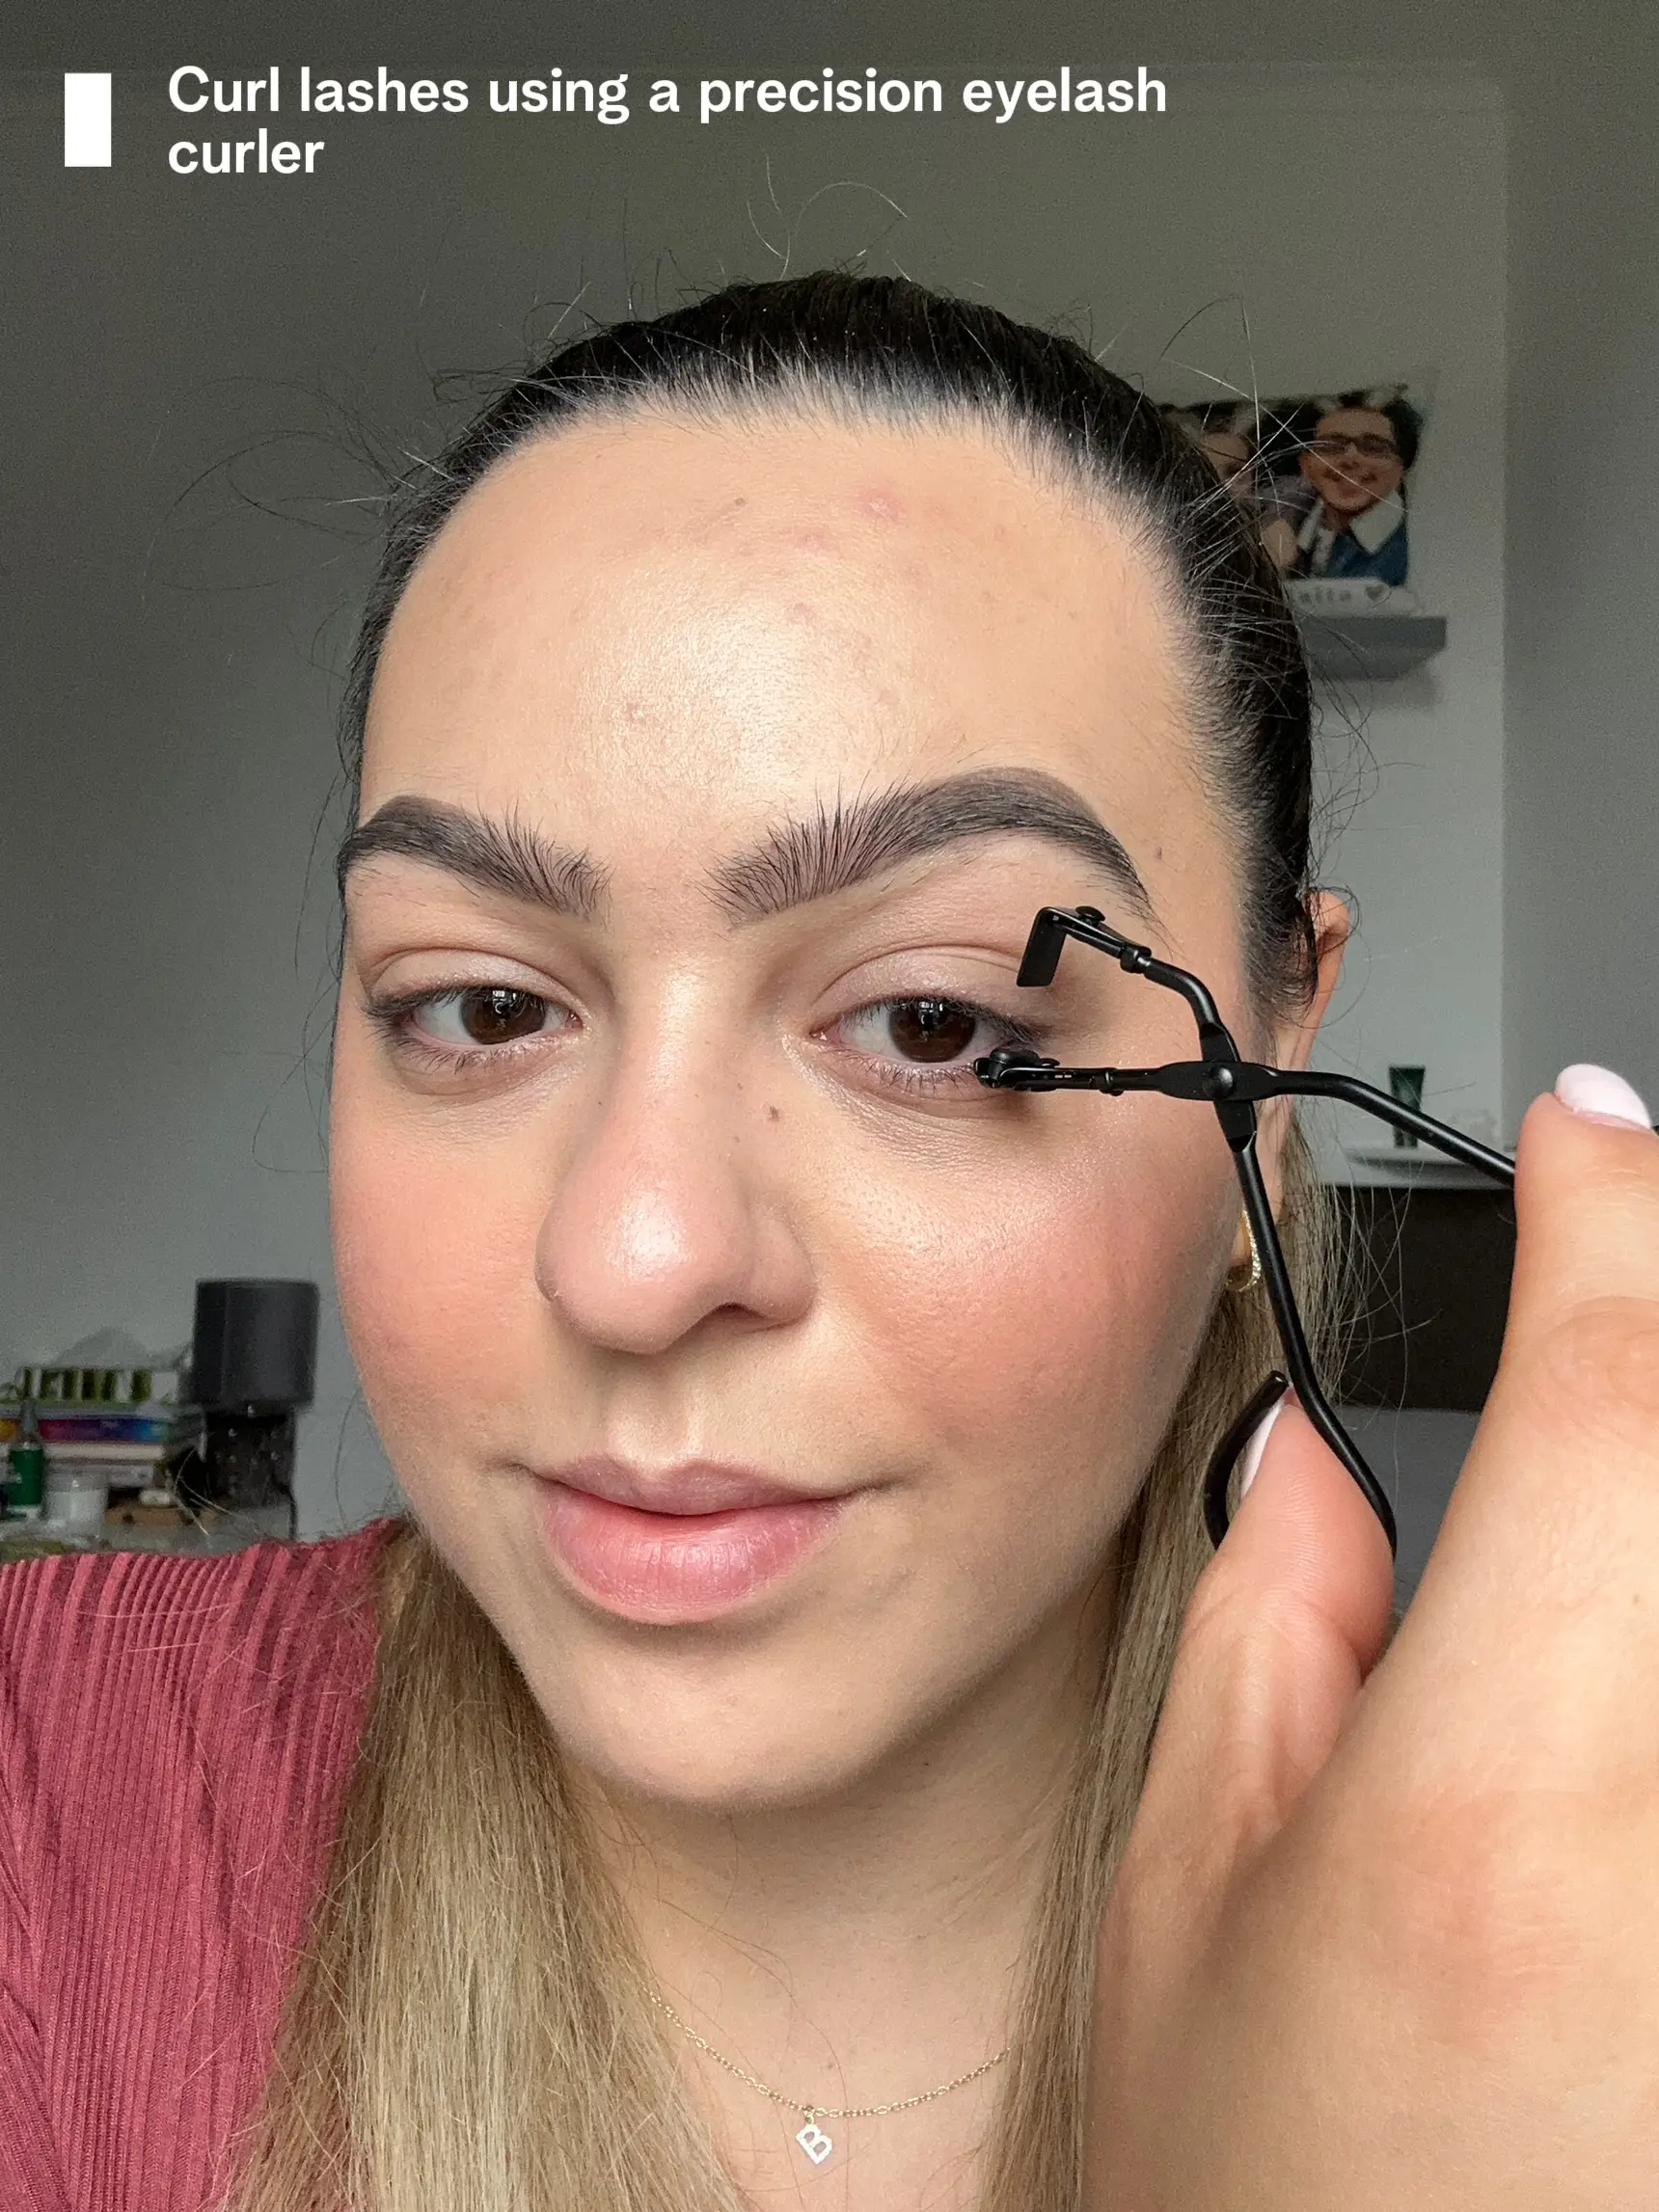 YSL Mascara: Product Review, Gallery posted by Tatiana Correia